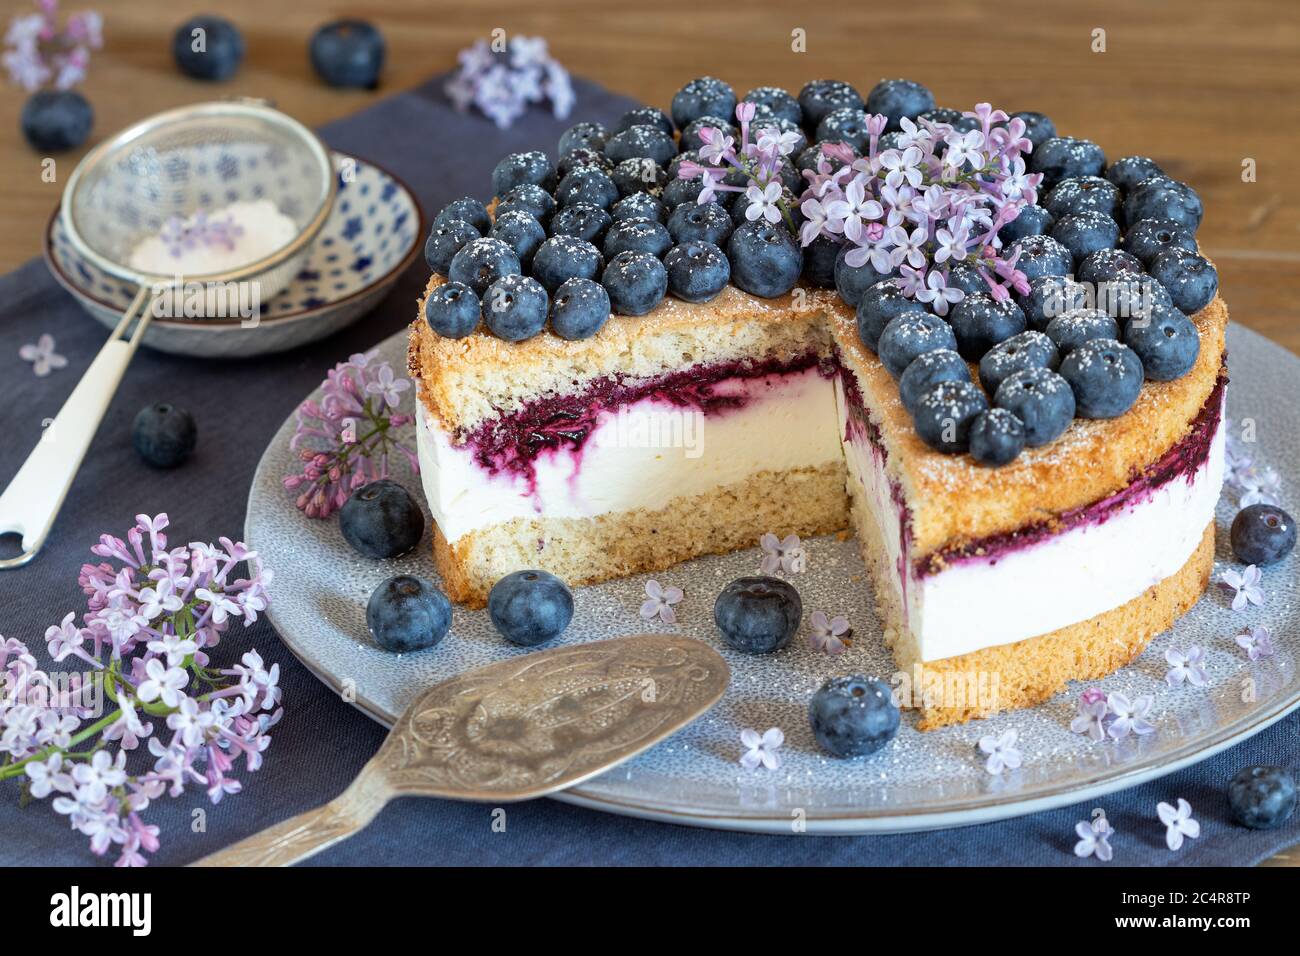 blueberry cake decorated with lilac flowers Stock Photo